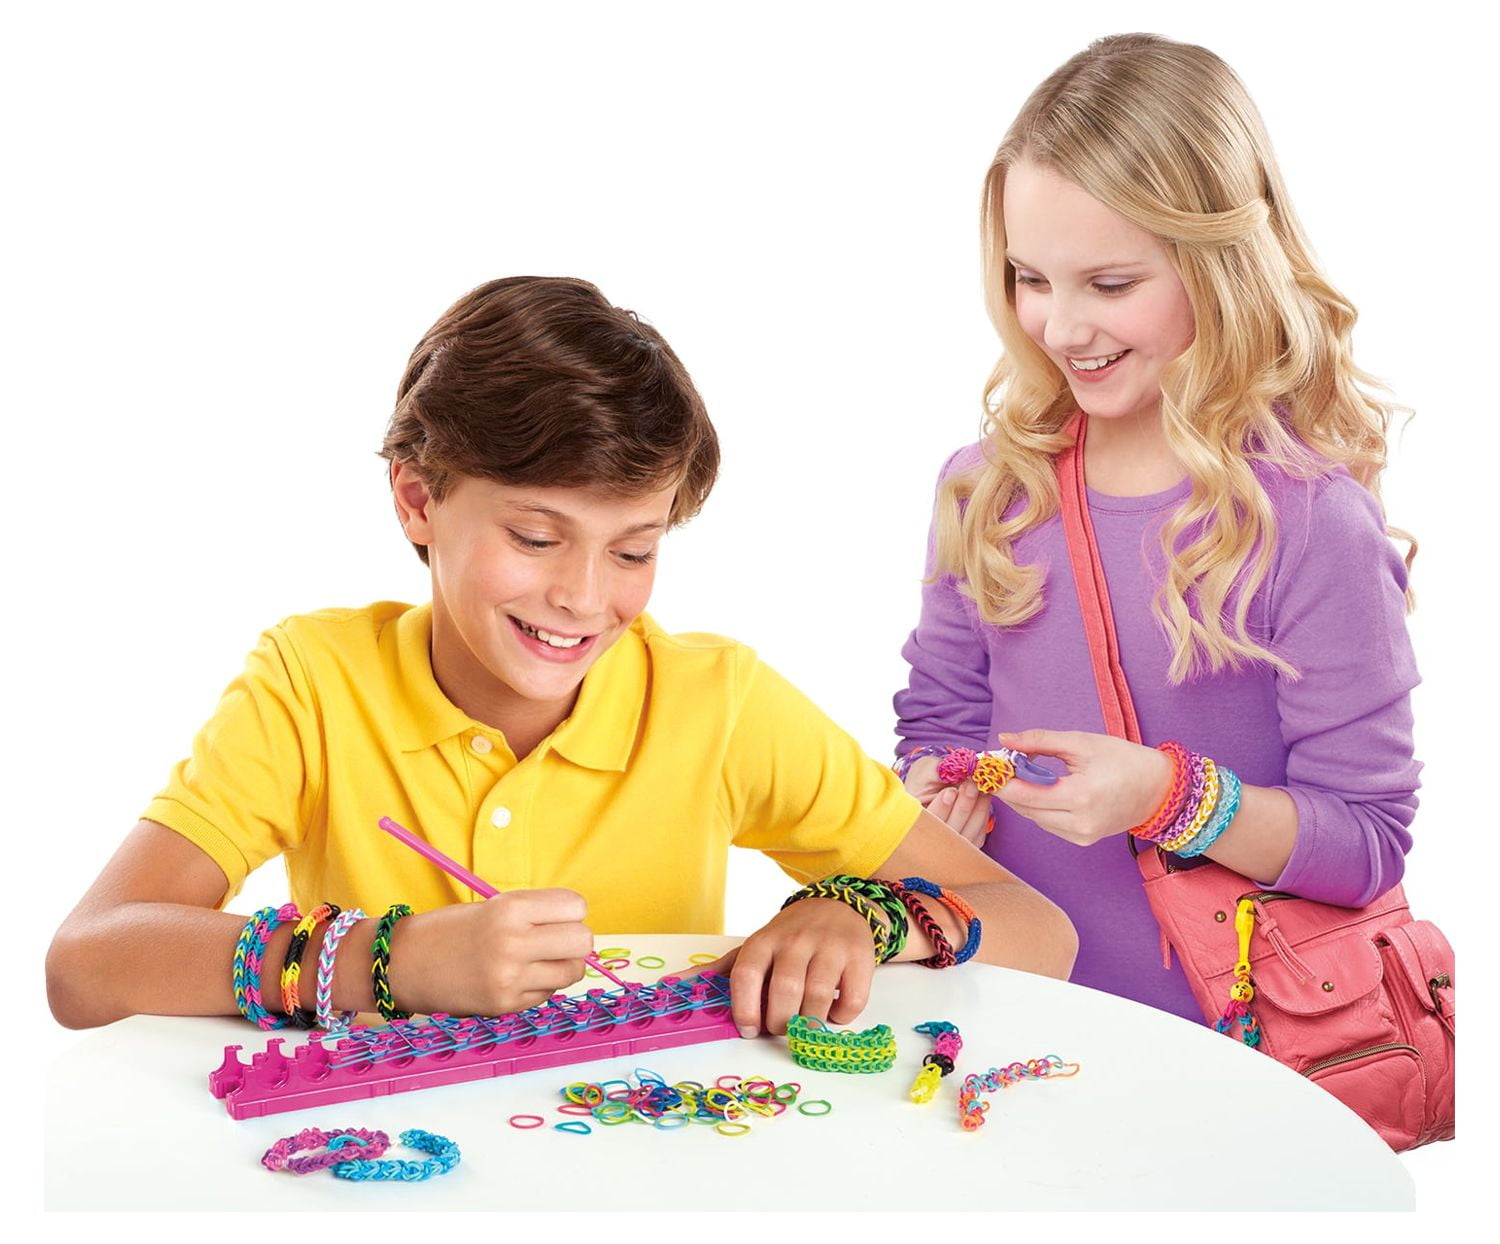 Cra-Z-Art Cra-Z-Loom Ultimate Rubber Band Loom, Multi-Color Kit for Ages 8  and up 